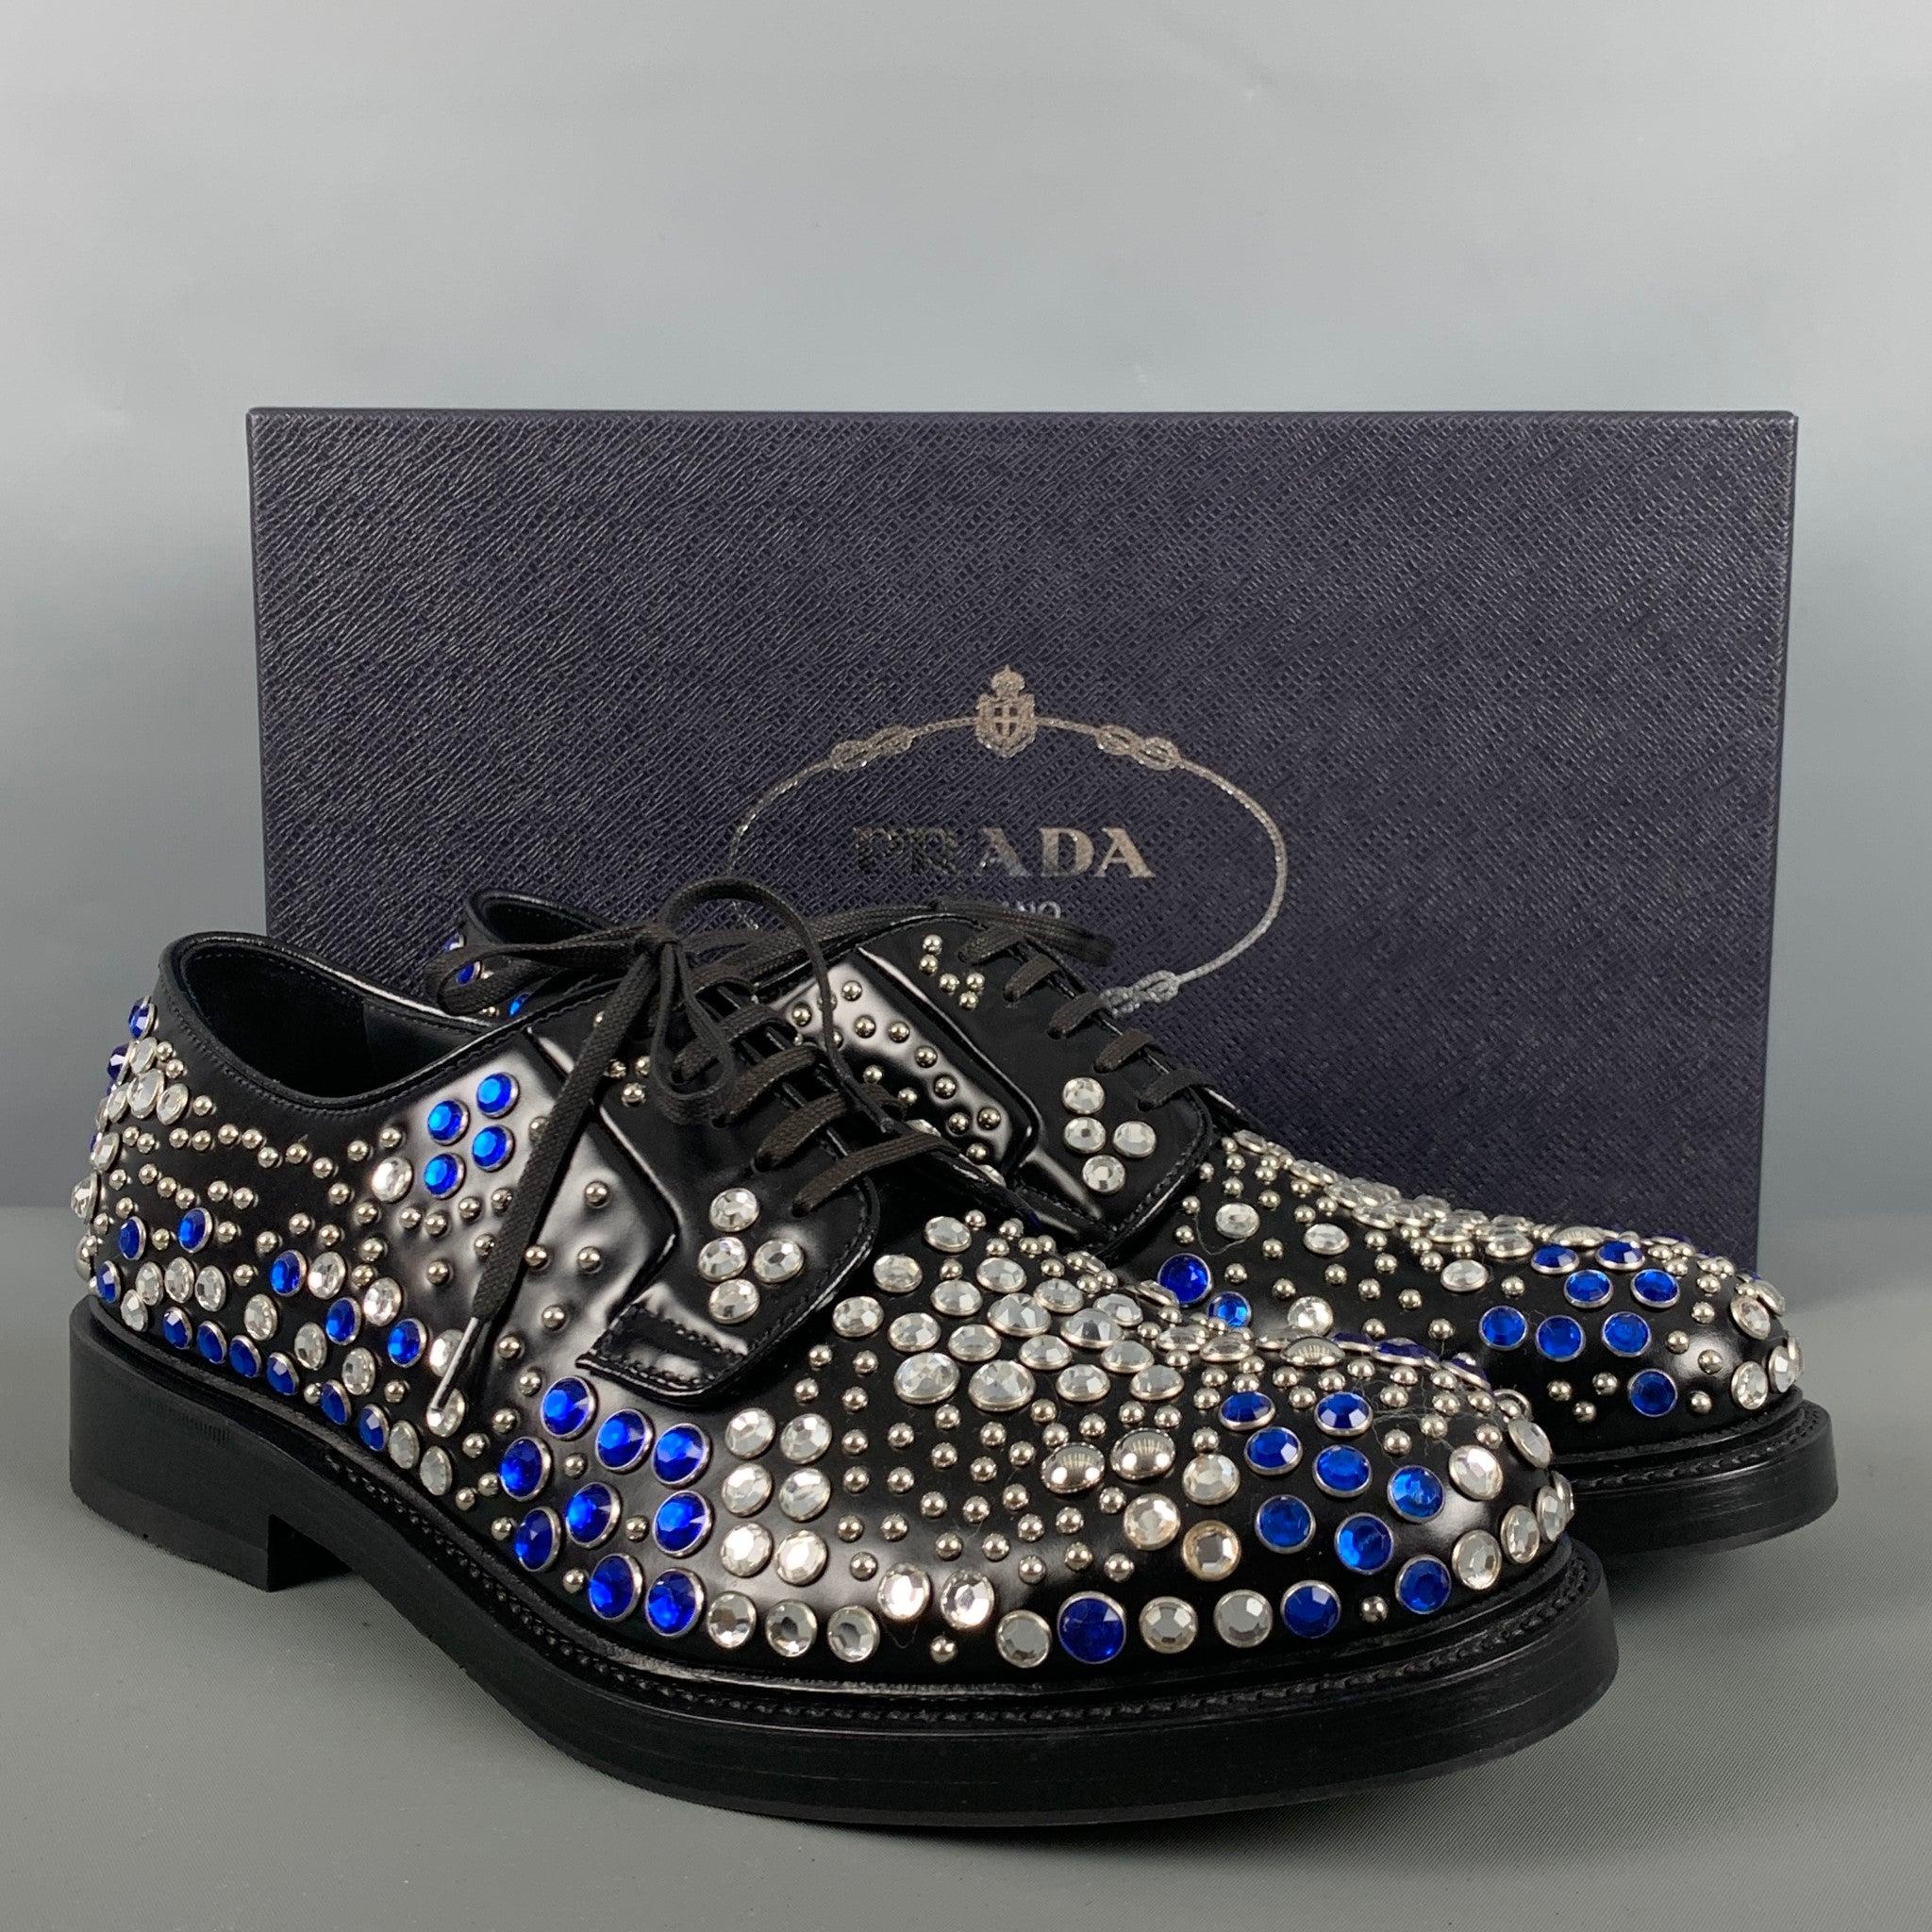 PRADA Size 9 Black Silver & Blue Studded Leather Lace Up Shoes For Sale 3